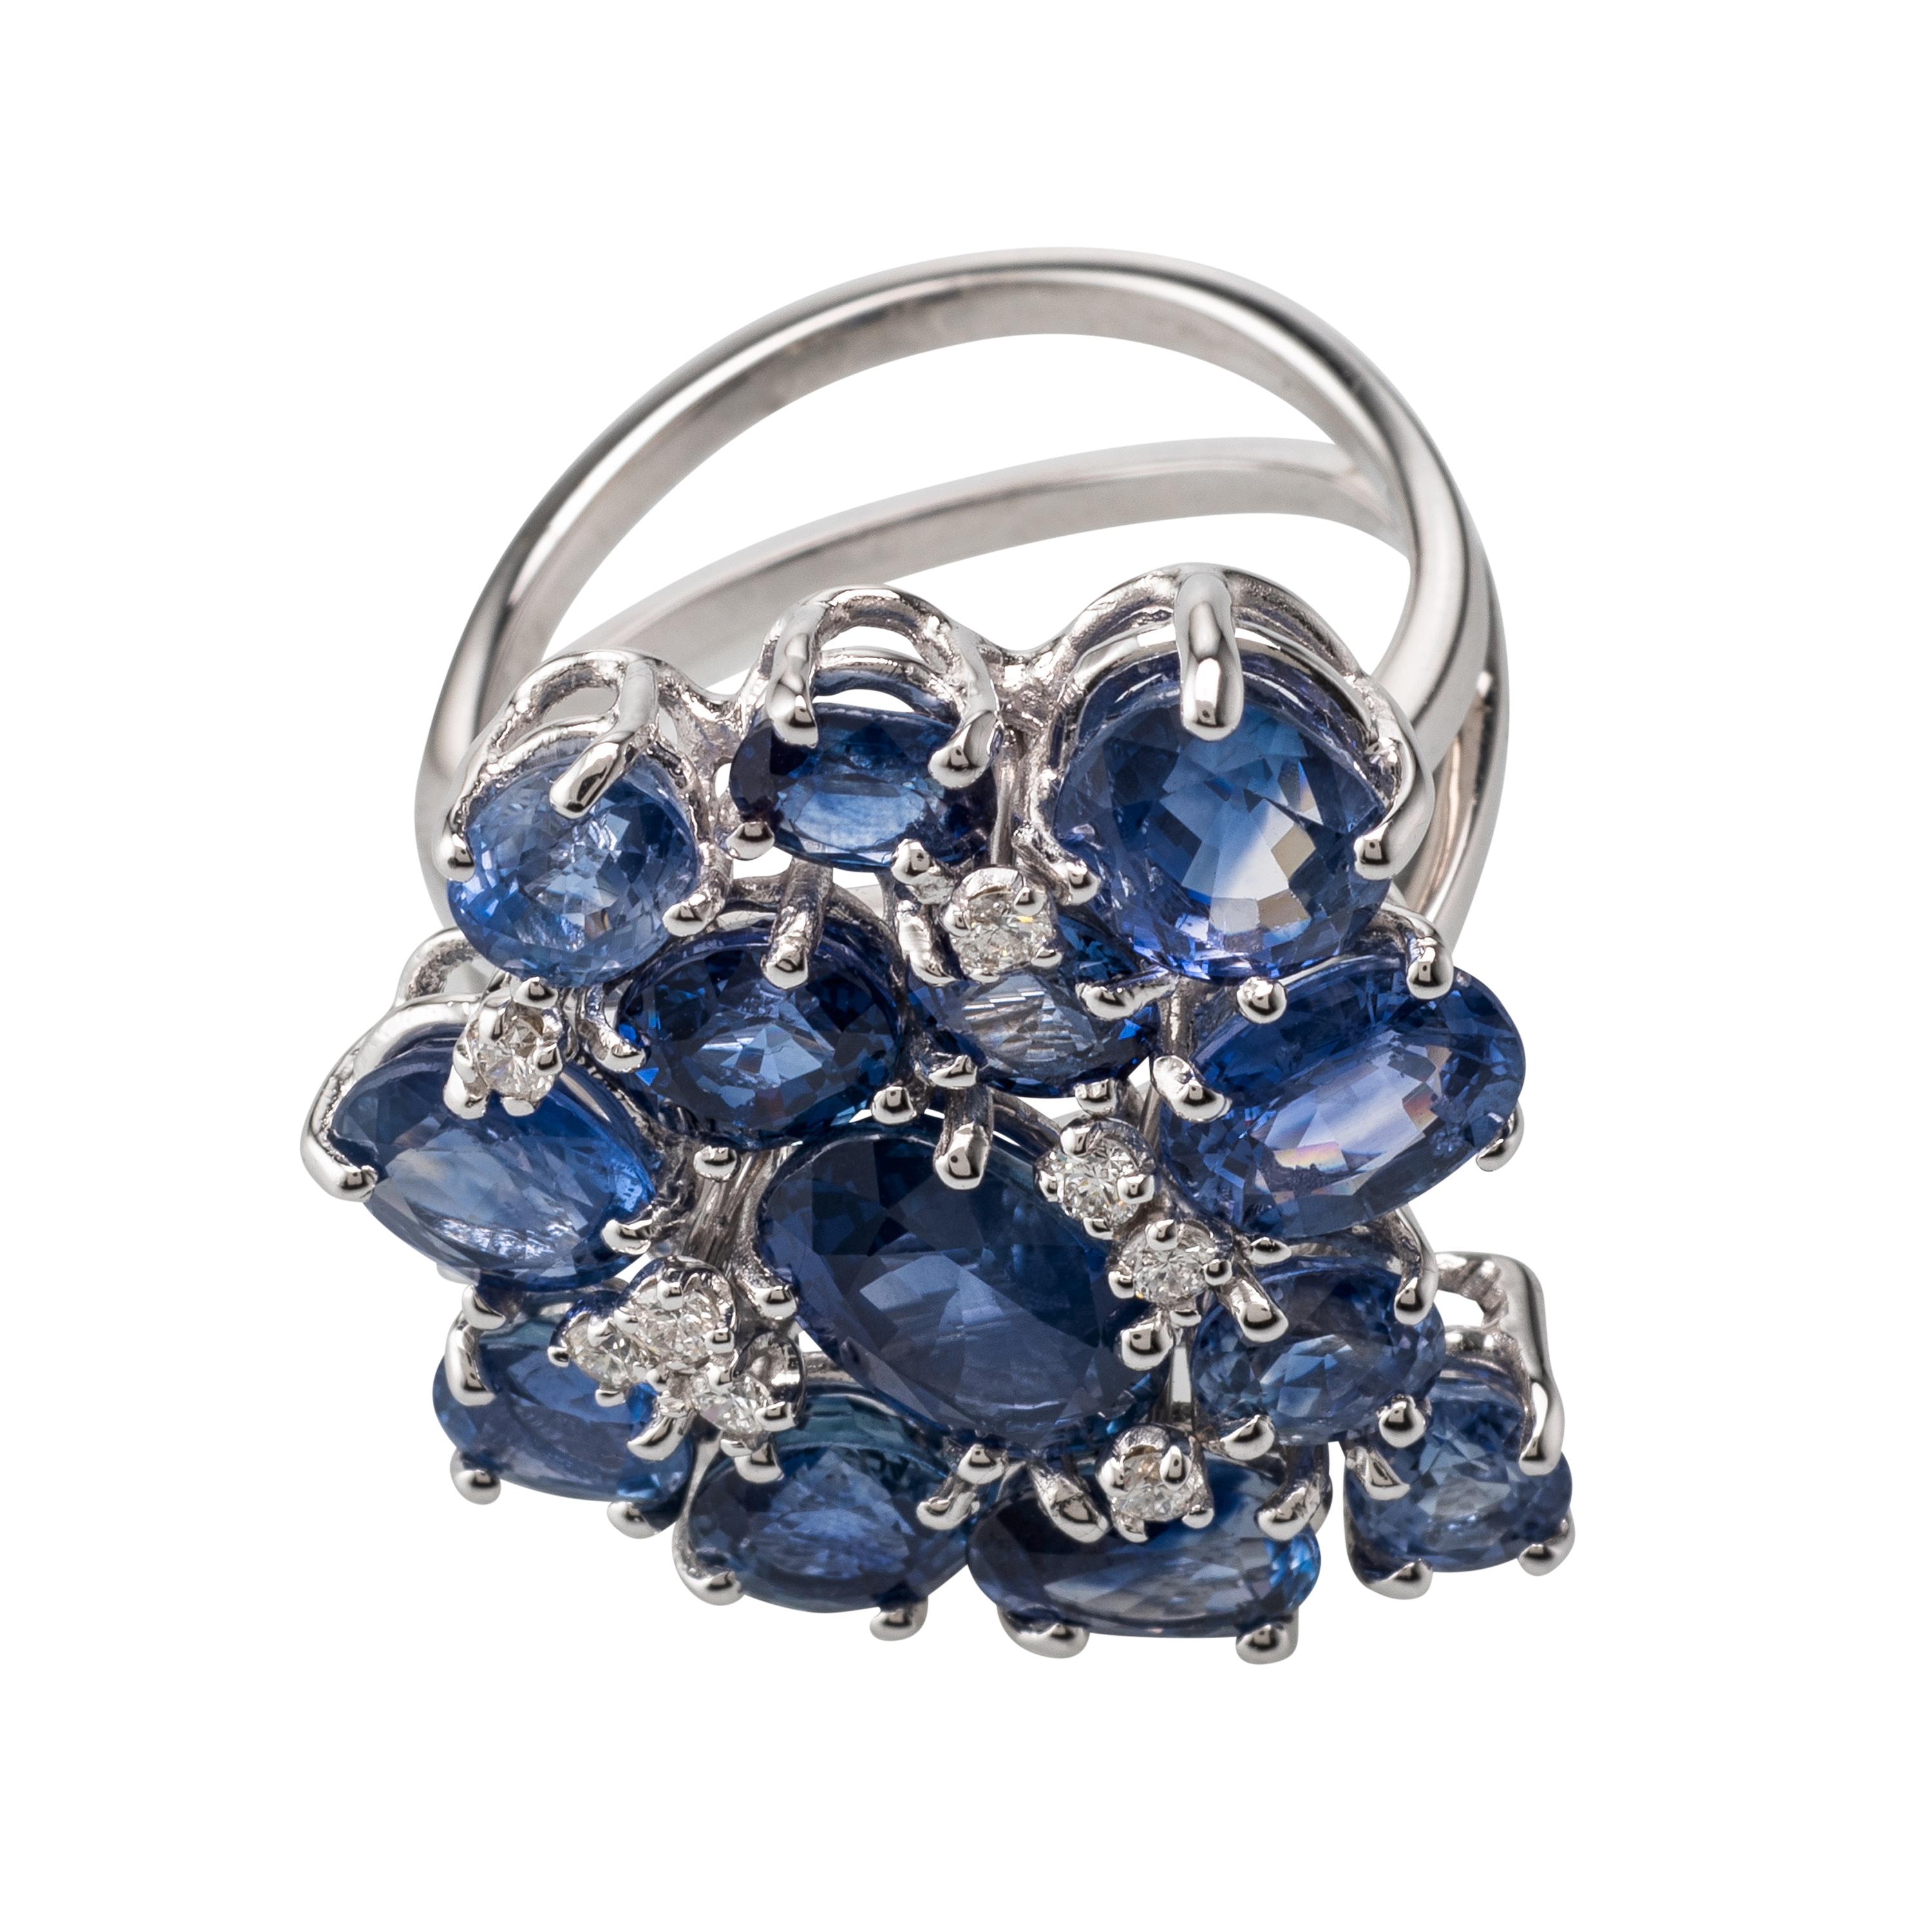 Multiple Blue Sapphire and Diamond set in 18 Karat White Gold.
Sapphire 10.42 Carats, Diamonds 0.18 Carats. This Ring is truly an impressive piece of jewellery. Produced in Italy, with attention to a very small detail.
Resizing can be done upon